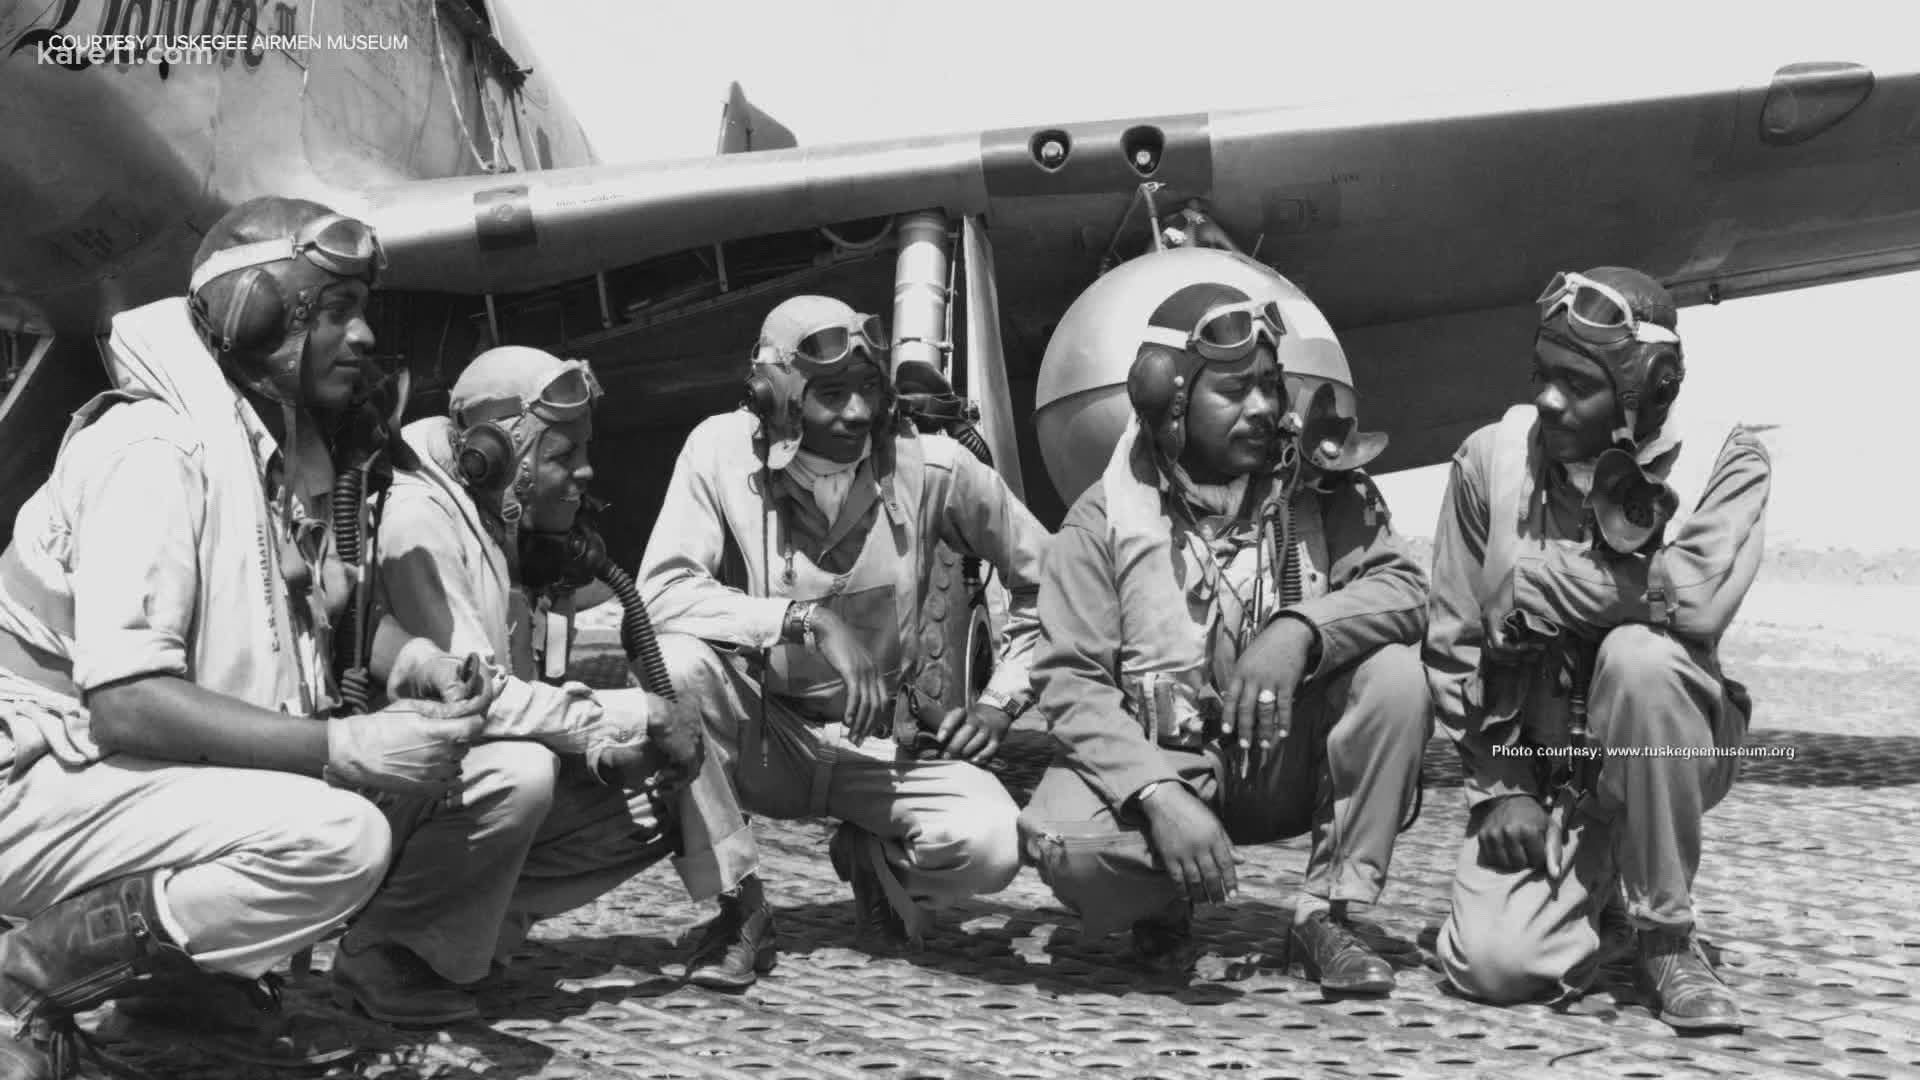 The Tuskegee Airmen were part of a flight training program for a limited number of Blacks on a segregated base in Tuskegee Alabama.